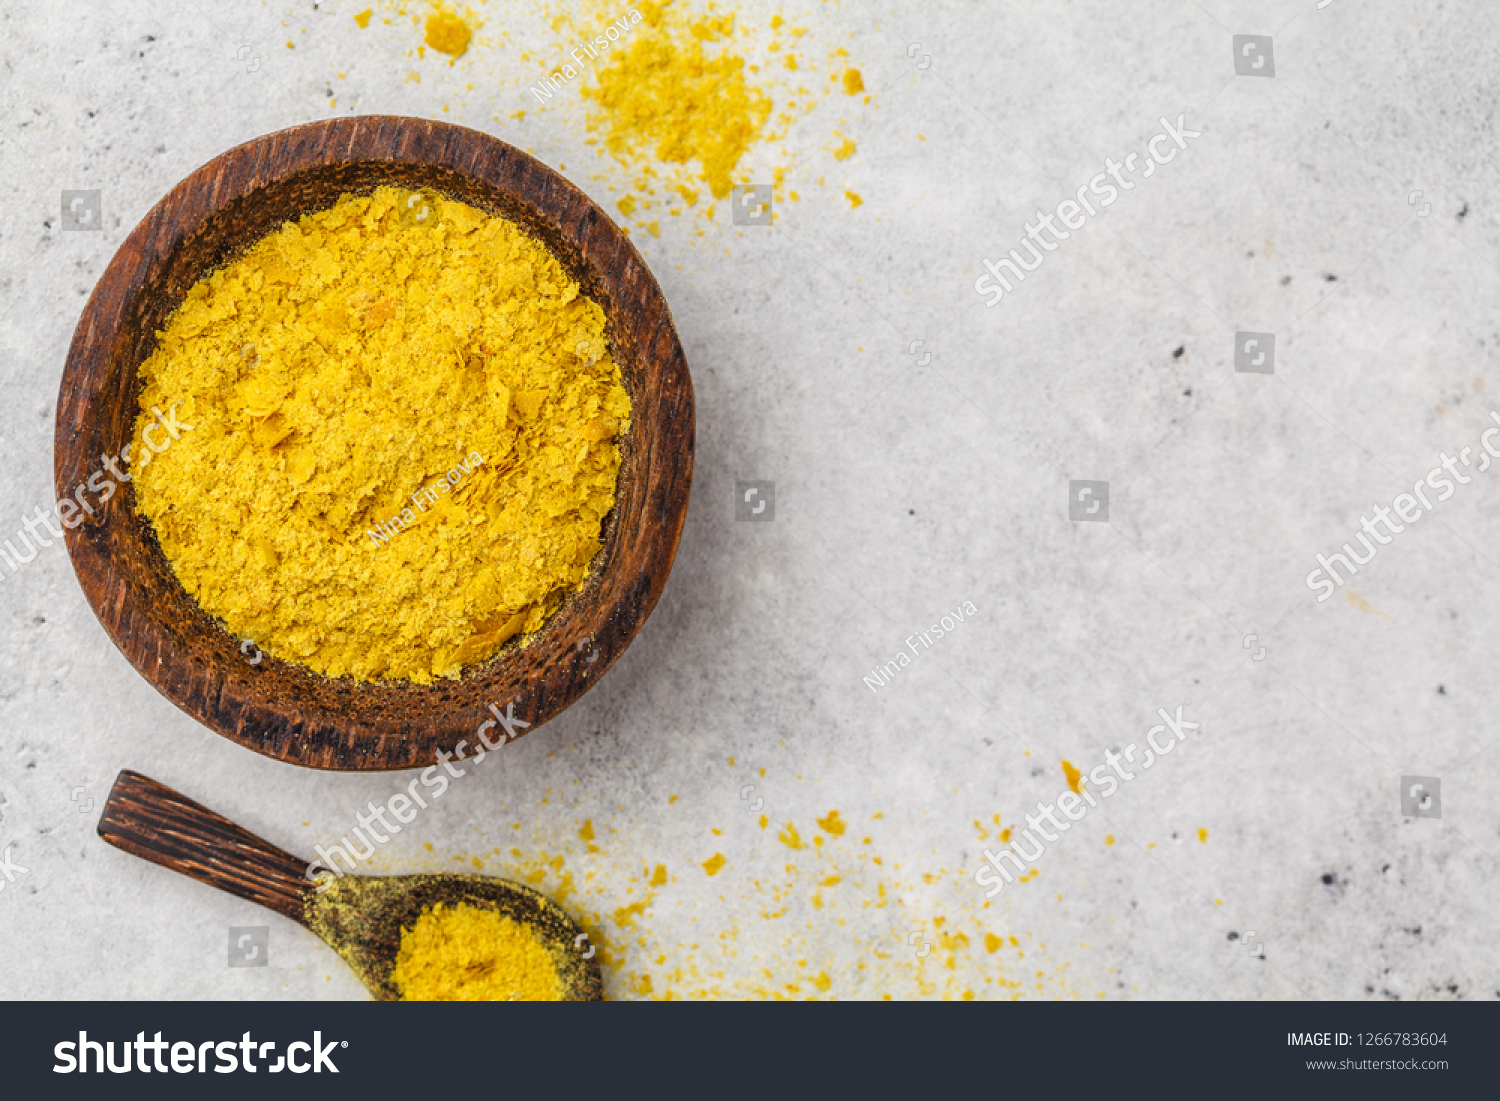 Nutritional yeast in a wooden bowl, copy space, white background, copy space. Healthy vegan food concept. #1266783604